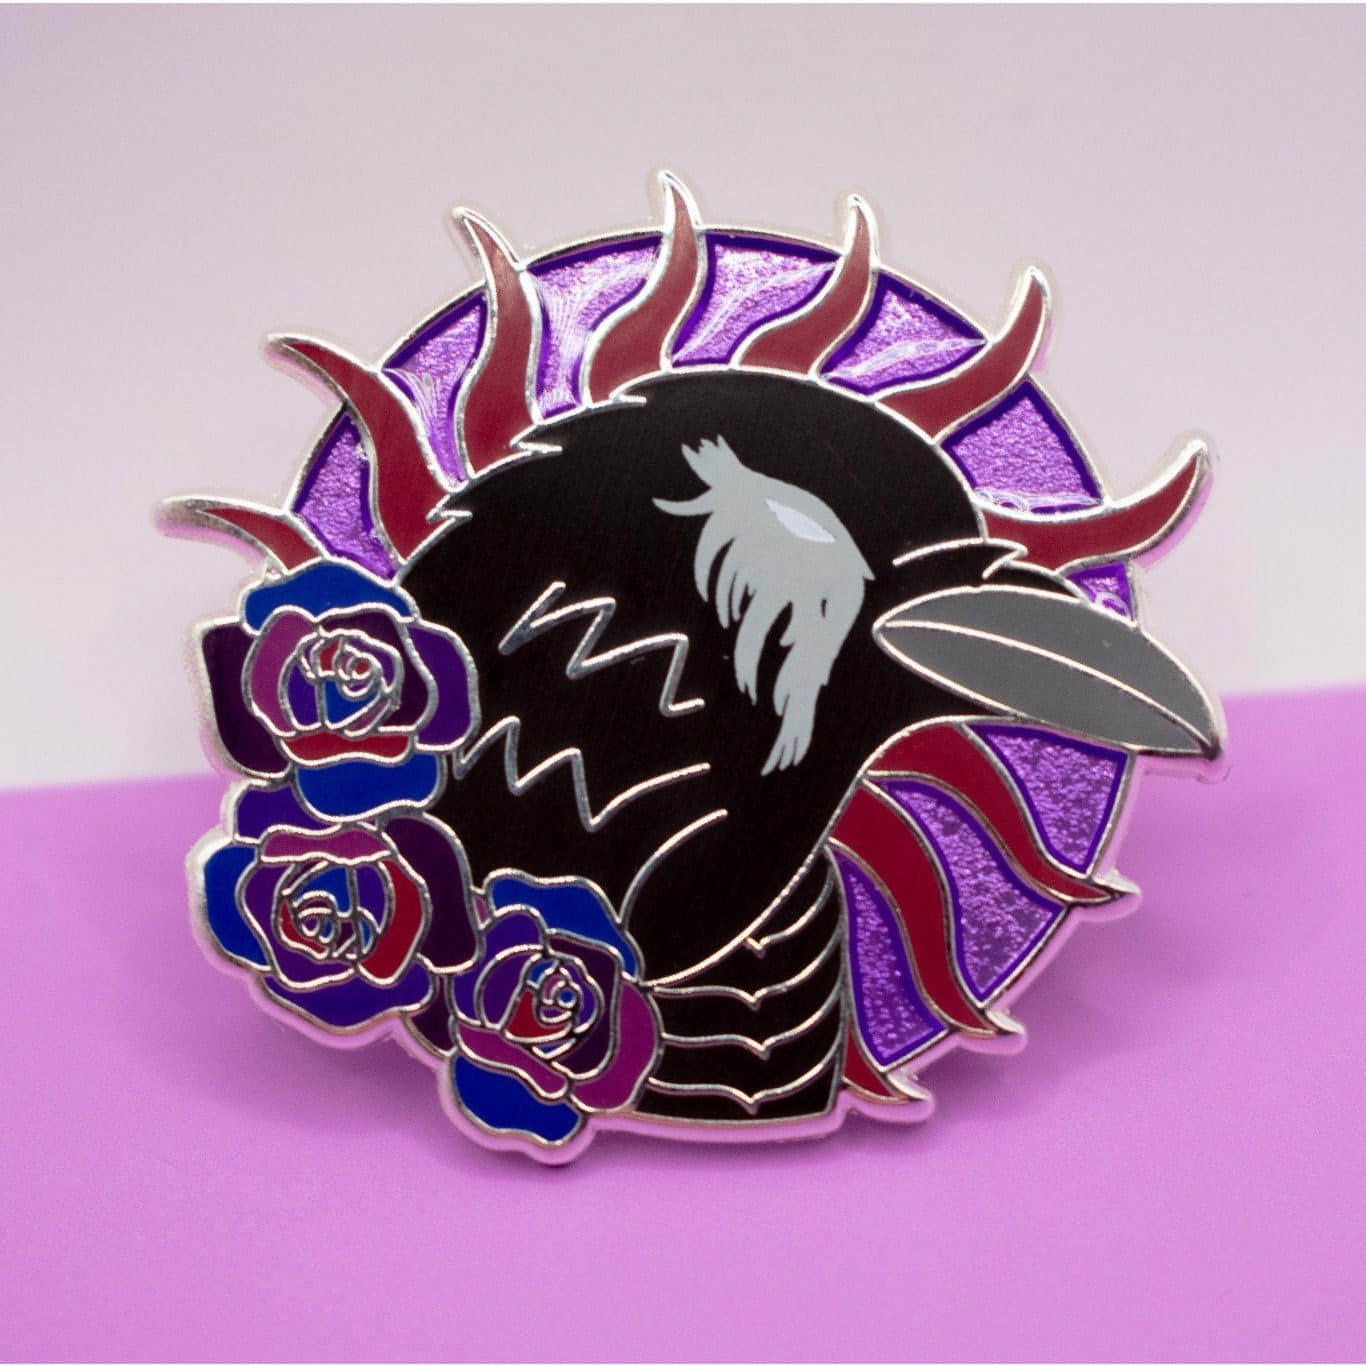 In the photo is a silver metal pin featuring a black crow looking right. The crow has a grey beak and a white eye with grey feathers around it. The crow is on a round purple background with violet spokes going around it. The round purple background is transluscent enamel to look 3D.  Beneath the crow at its neck are three roses in various shades of purple.